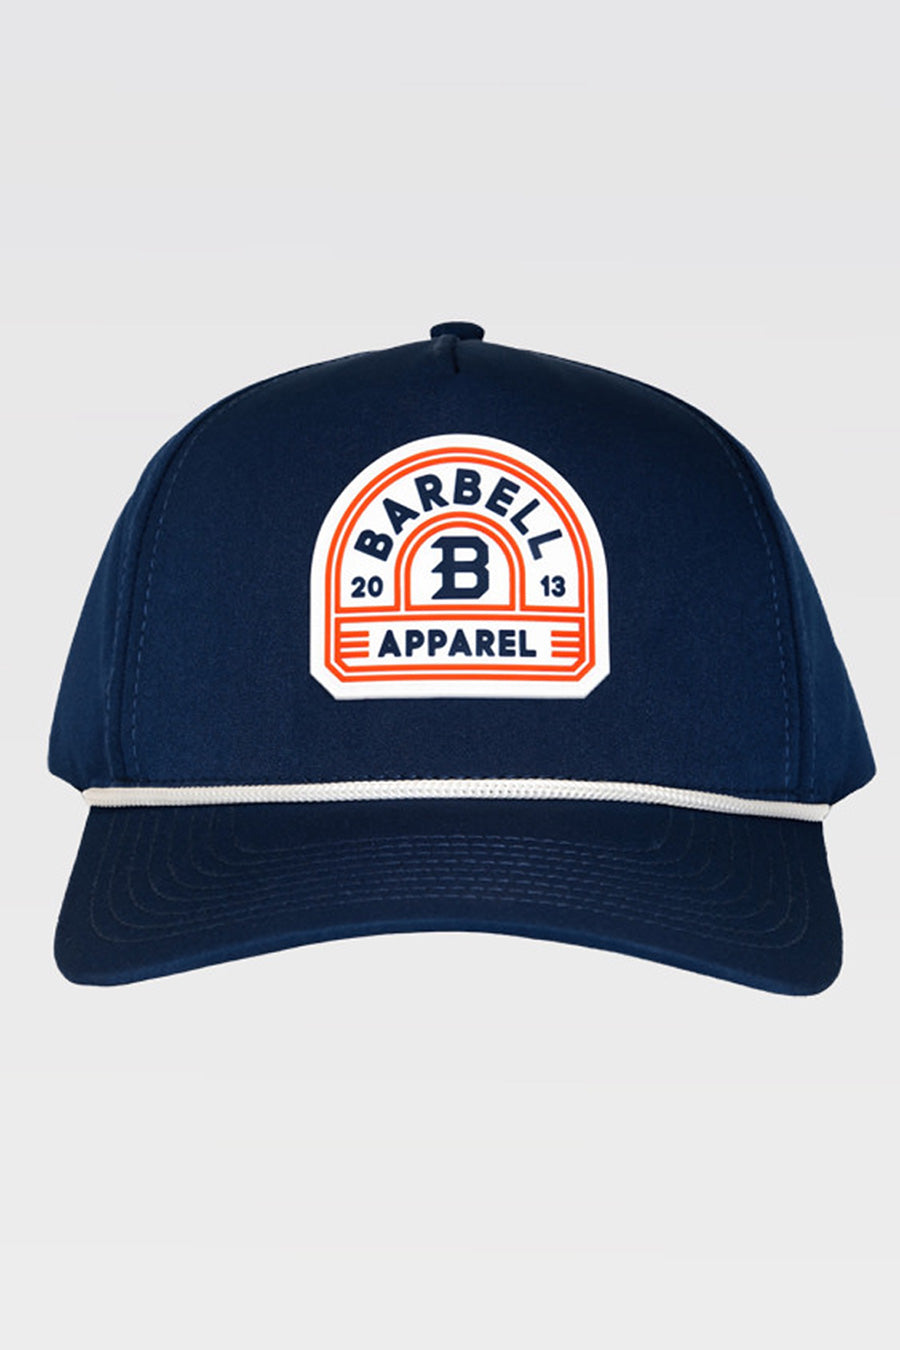 Barbell Range Hat - Navy - photo from front #color_navy